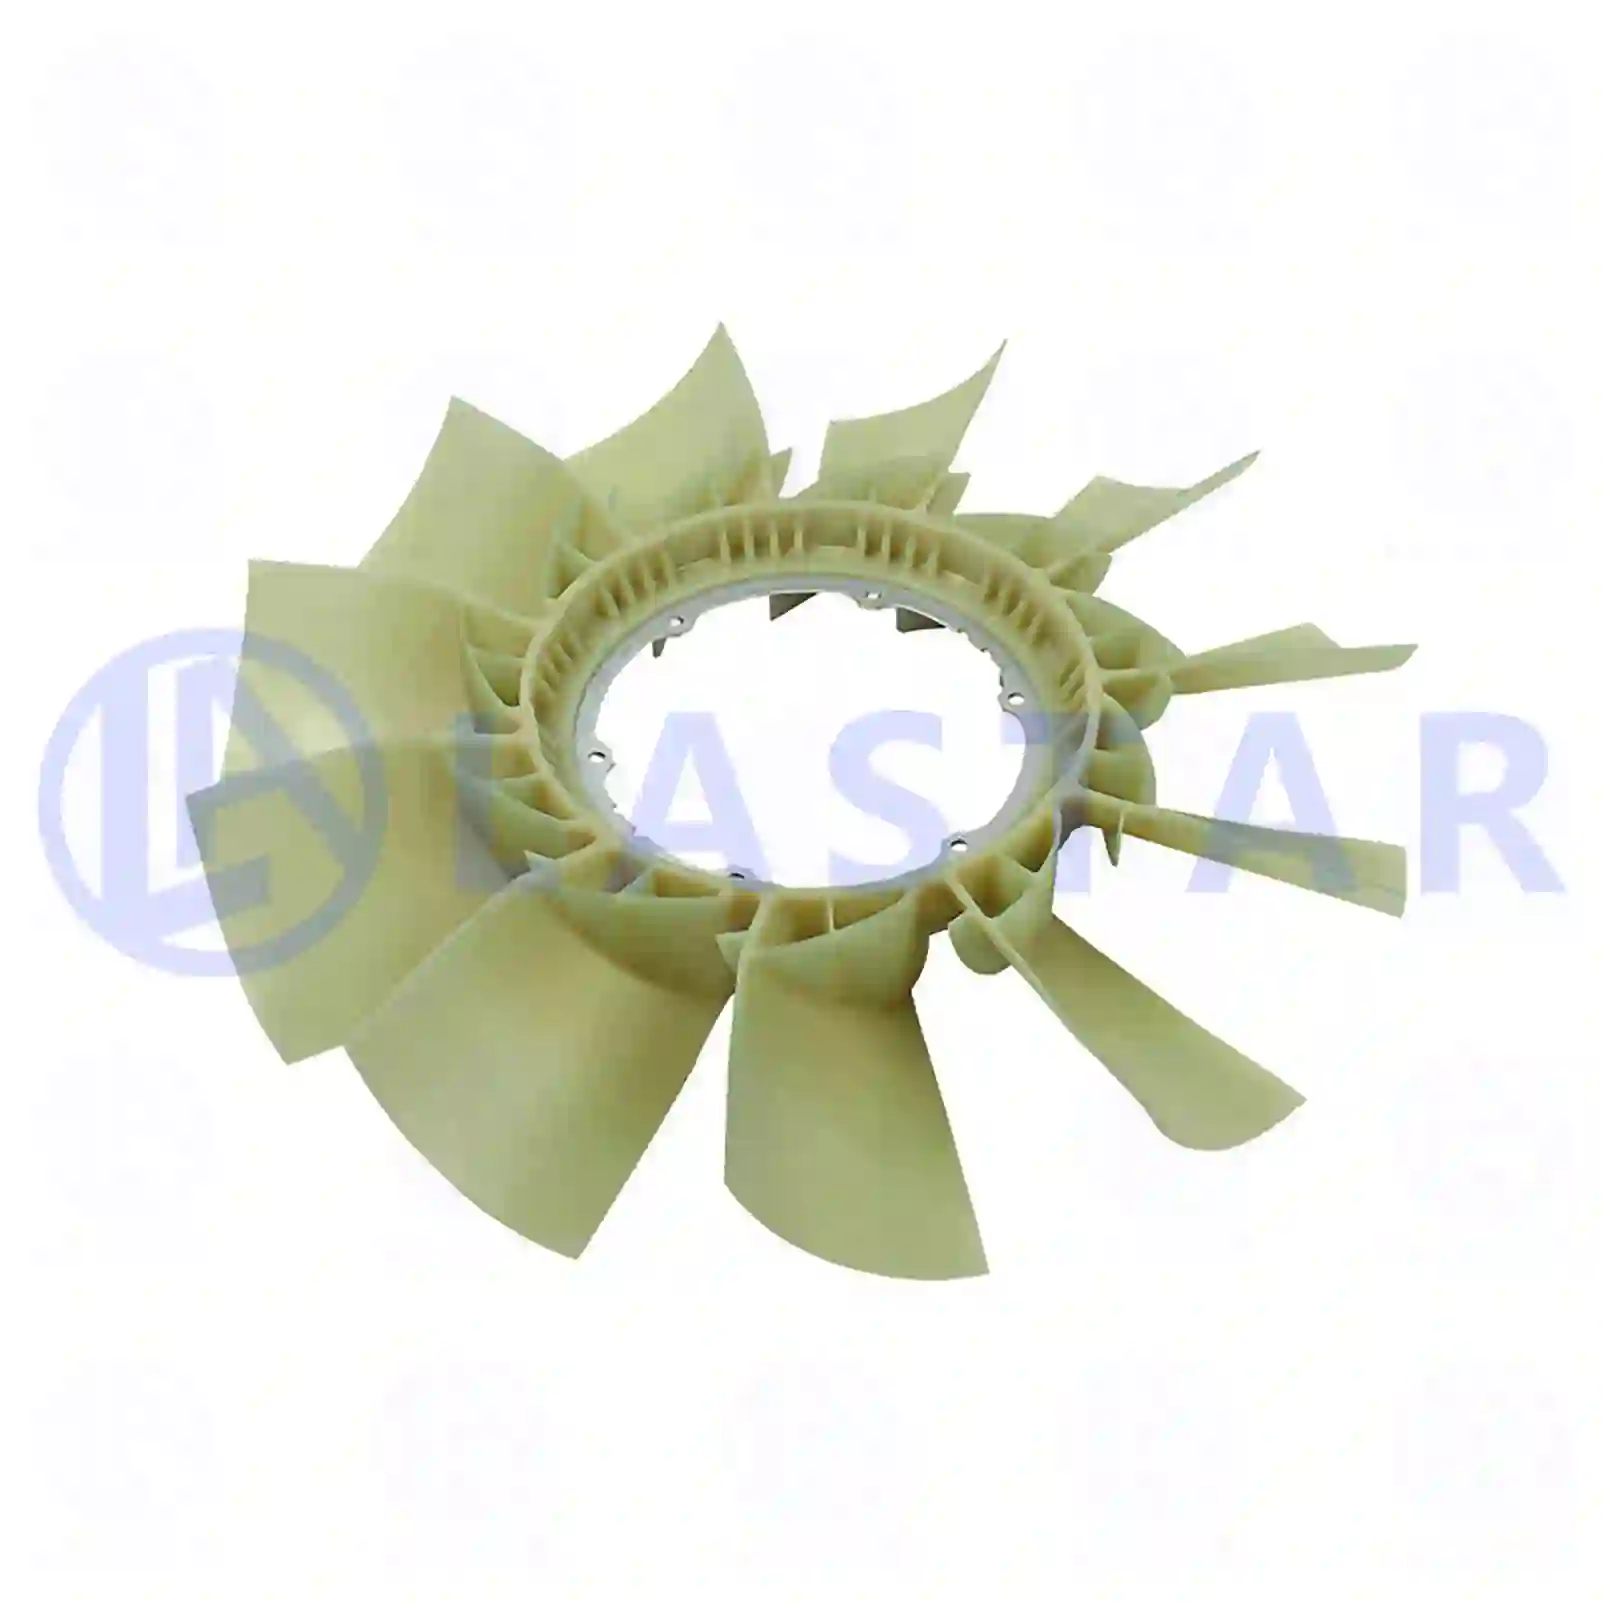 Fan, 77708624, 1644886, ZG00374-0008 ||  77708624 Lastar Spare Part | Truck Spare Parts, Auotomotive Spare Parts Fan, 77708624, 1644886, ZG00374-0008 ||  77708624 Lastar Spare Part | Truck Spare Parts, Auotomotive Spare Parts